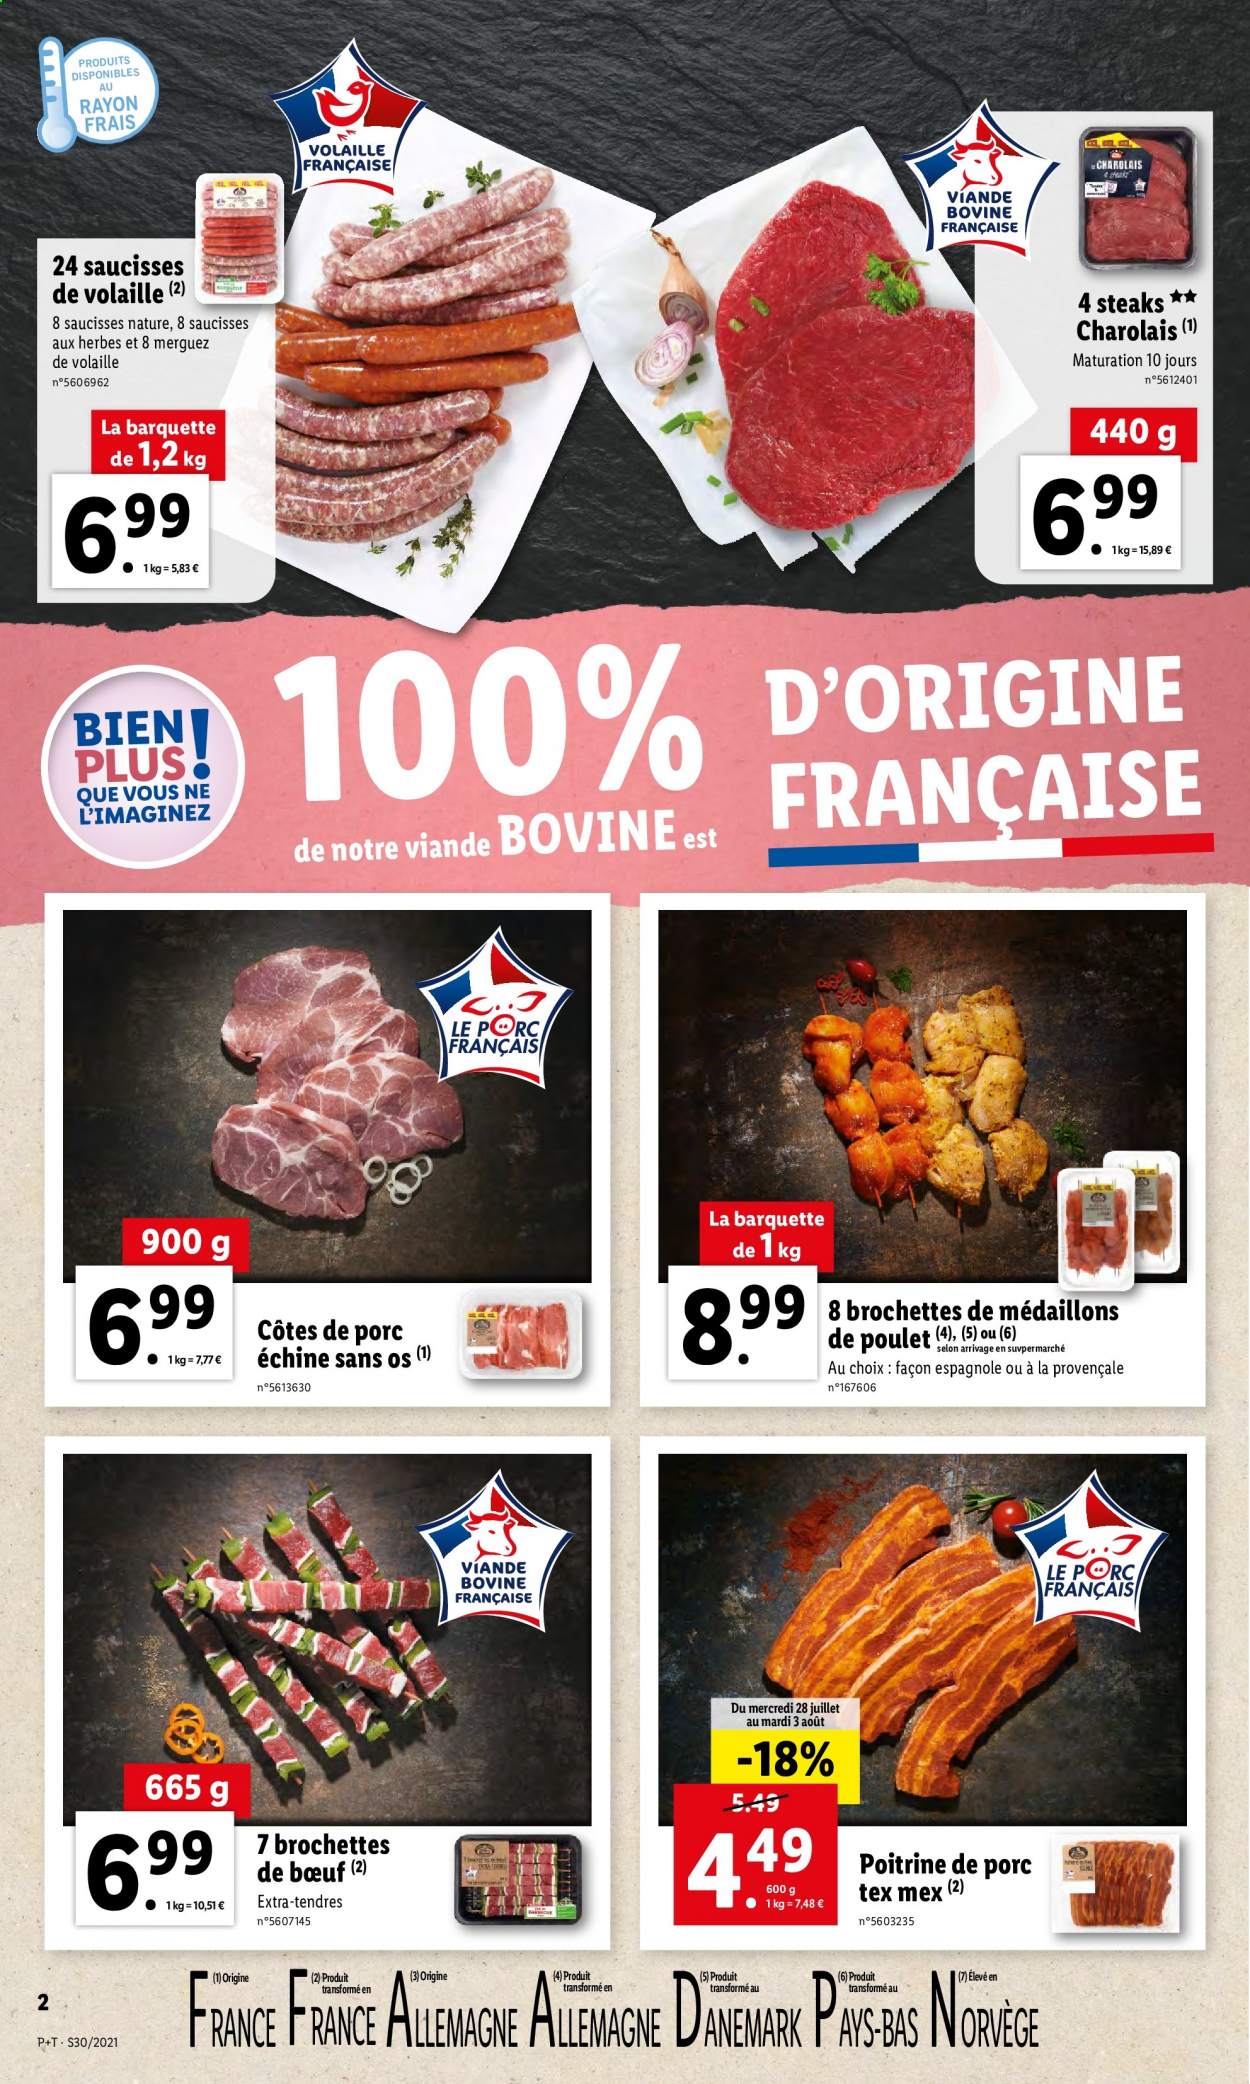 Catalogue Lidl - 28.07.2021 - 03.08.2021. Page 2.